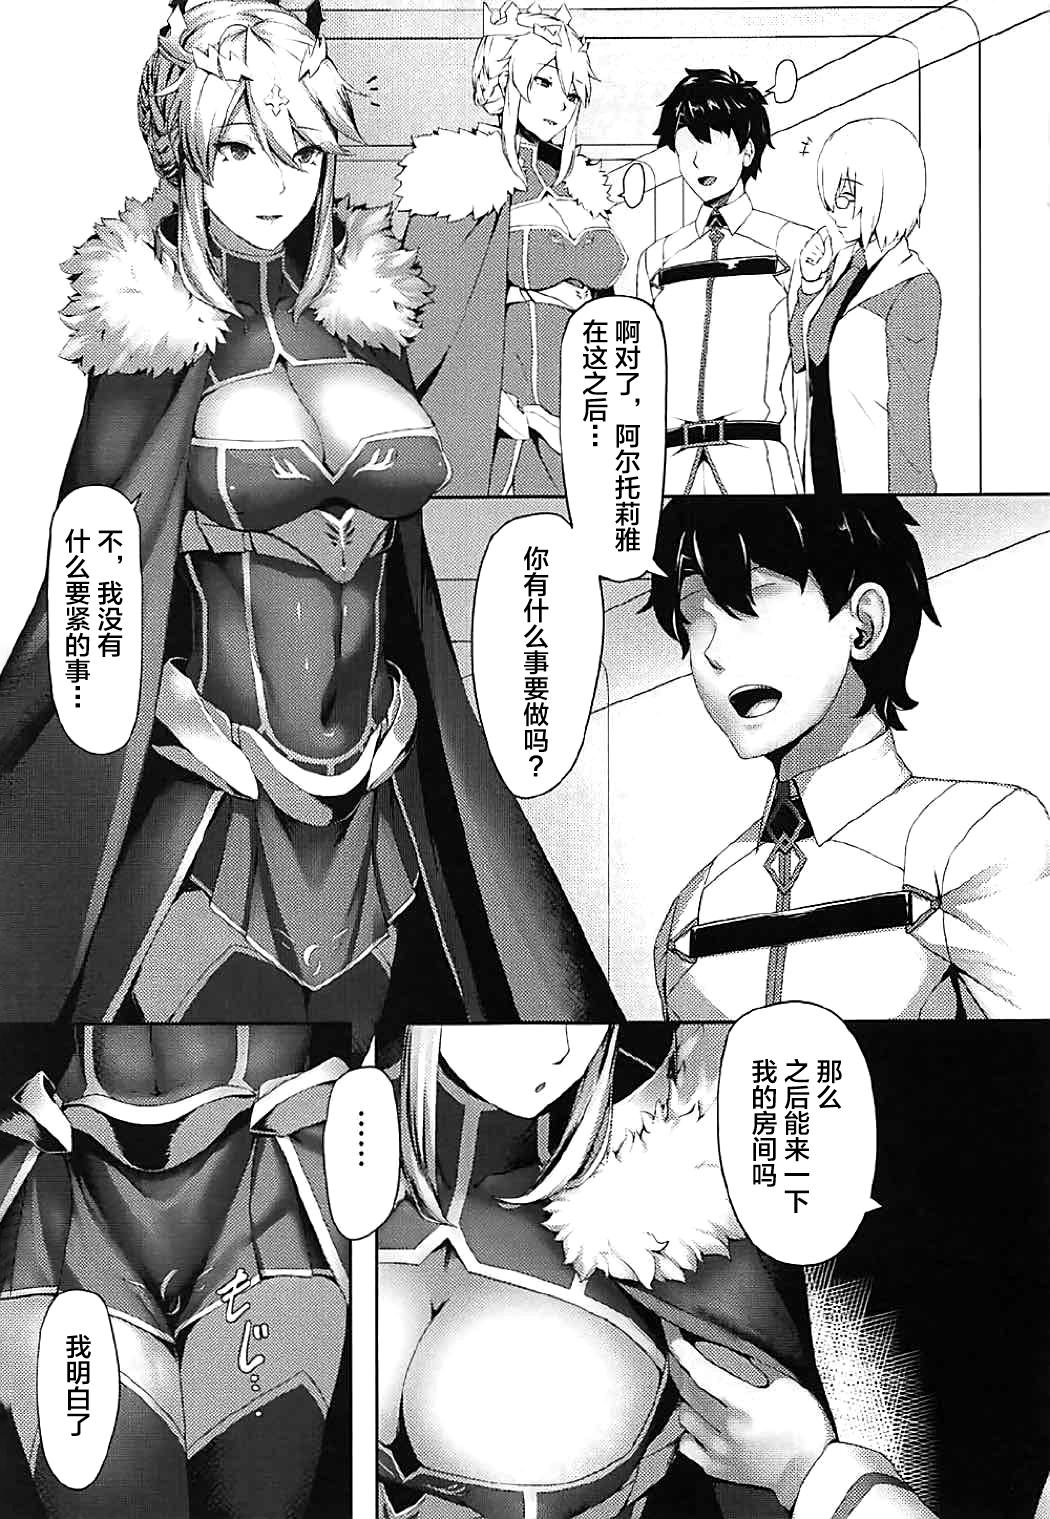 Porn What do you like? - Fate grand order Girls Getting Fucked - Page 2